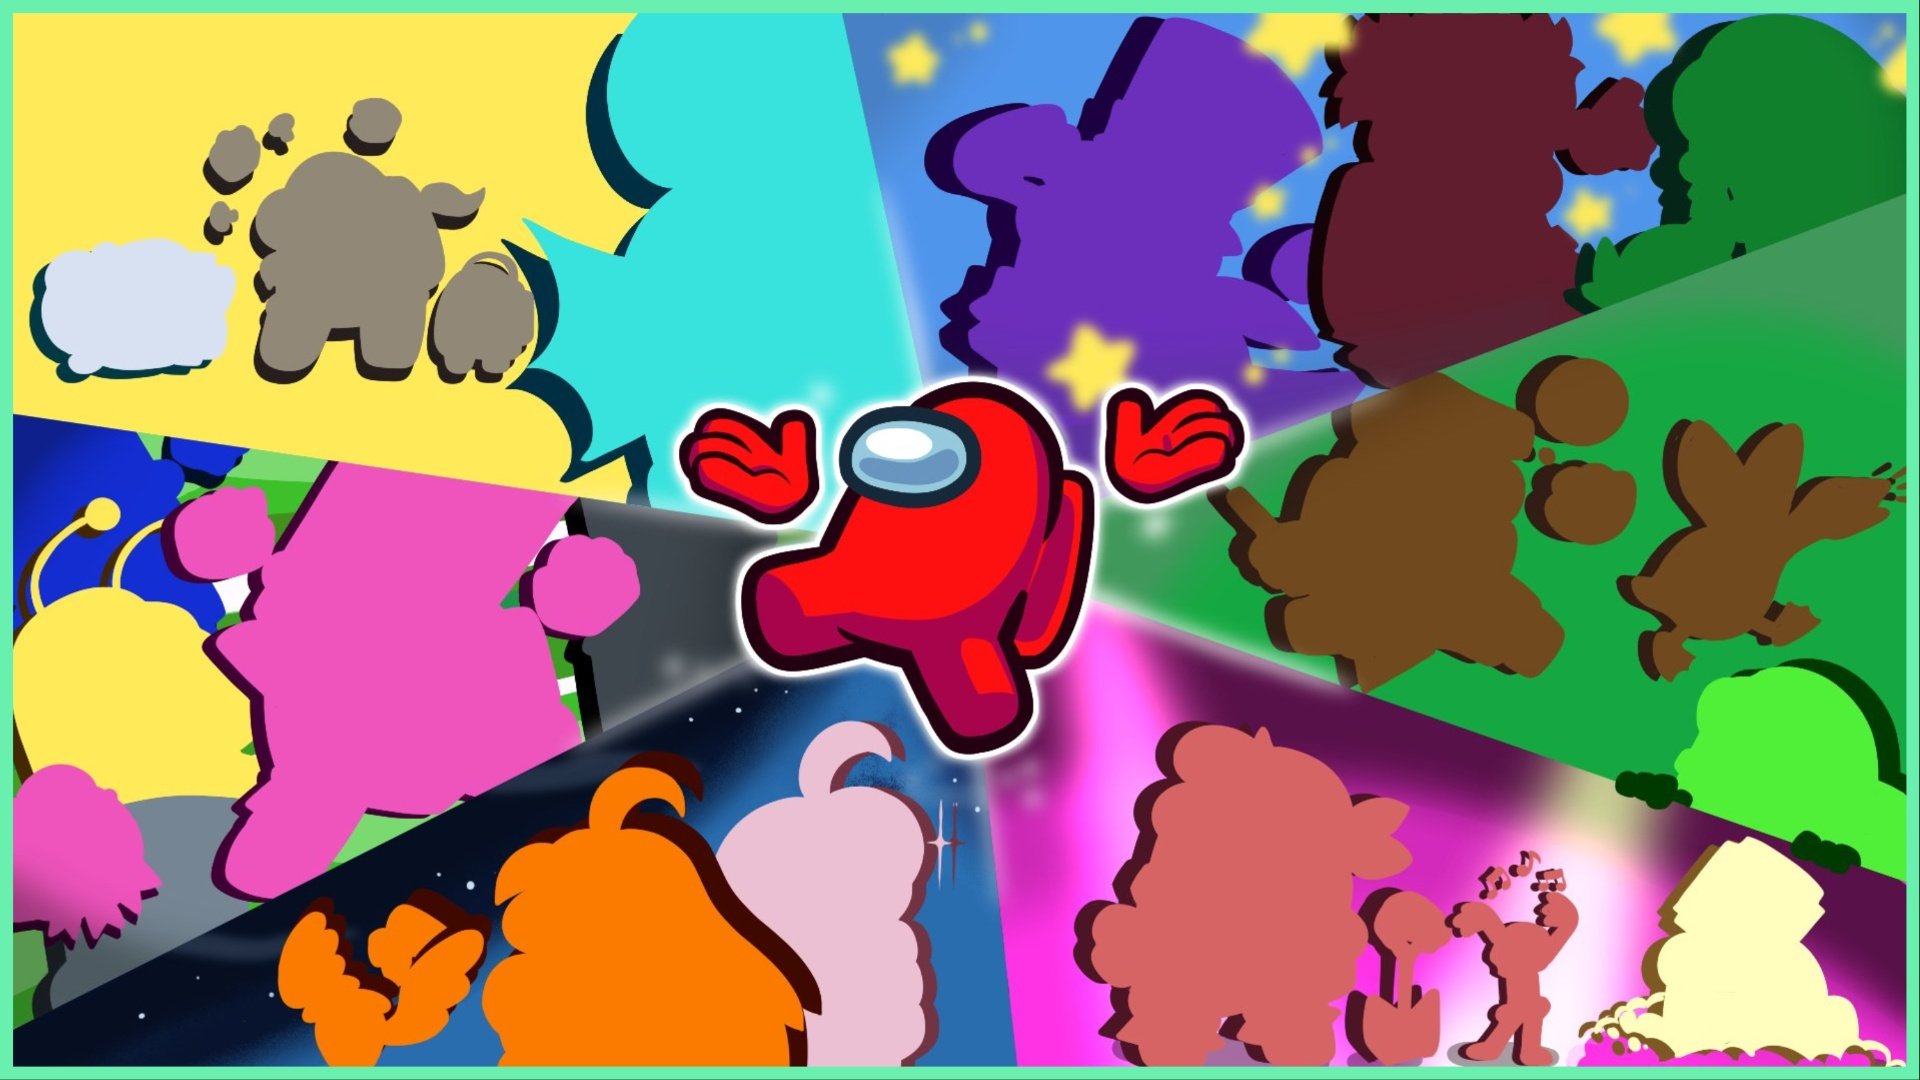 The image shows a red crewmate suspended in the air with hands outward to either side. Behind him is many segments split into colours which indicate an indie game each. Each section has numerous silhouettes for the collabs